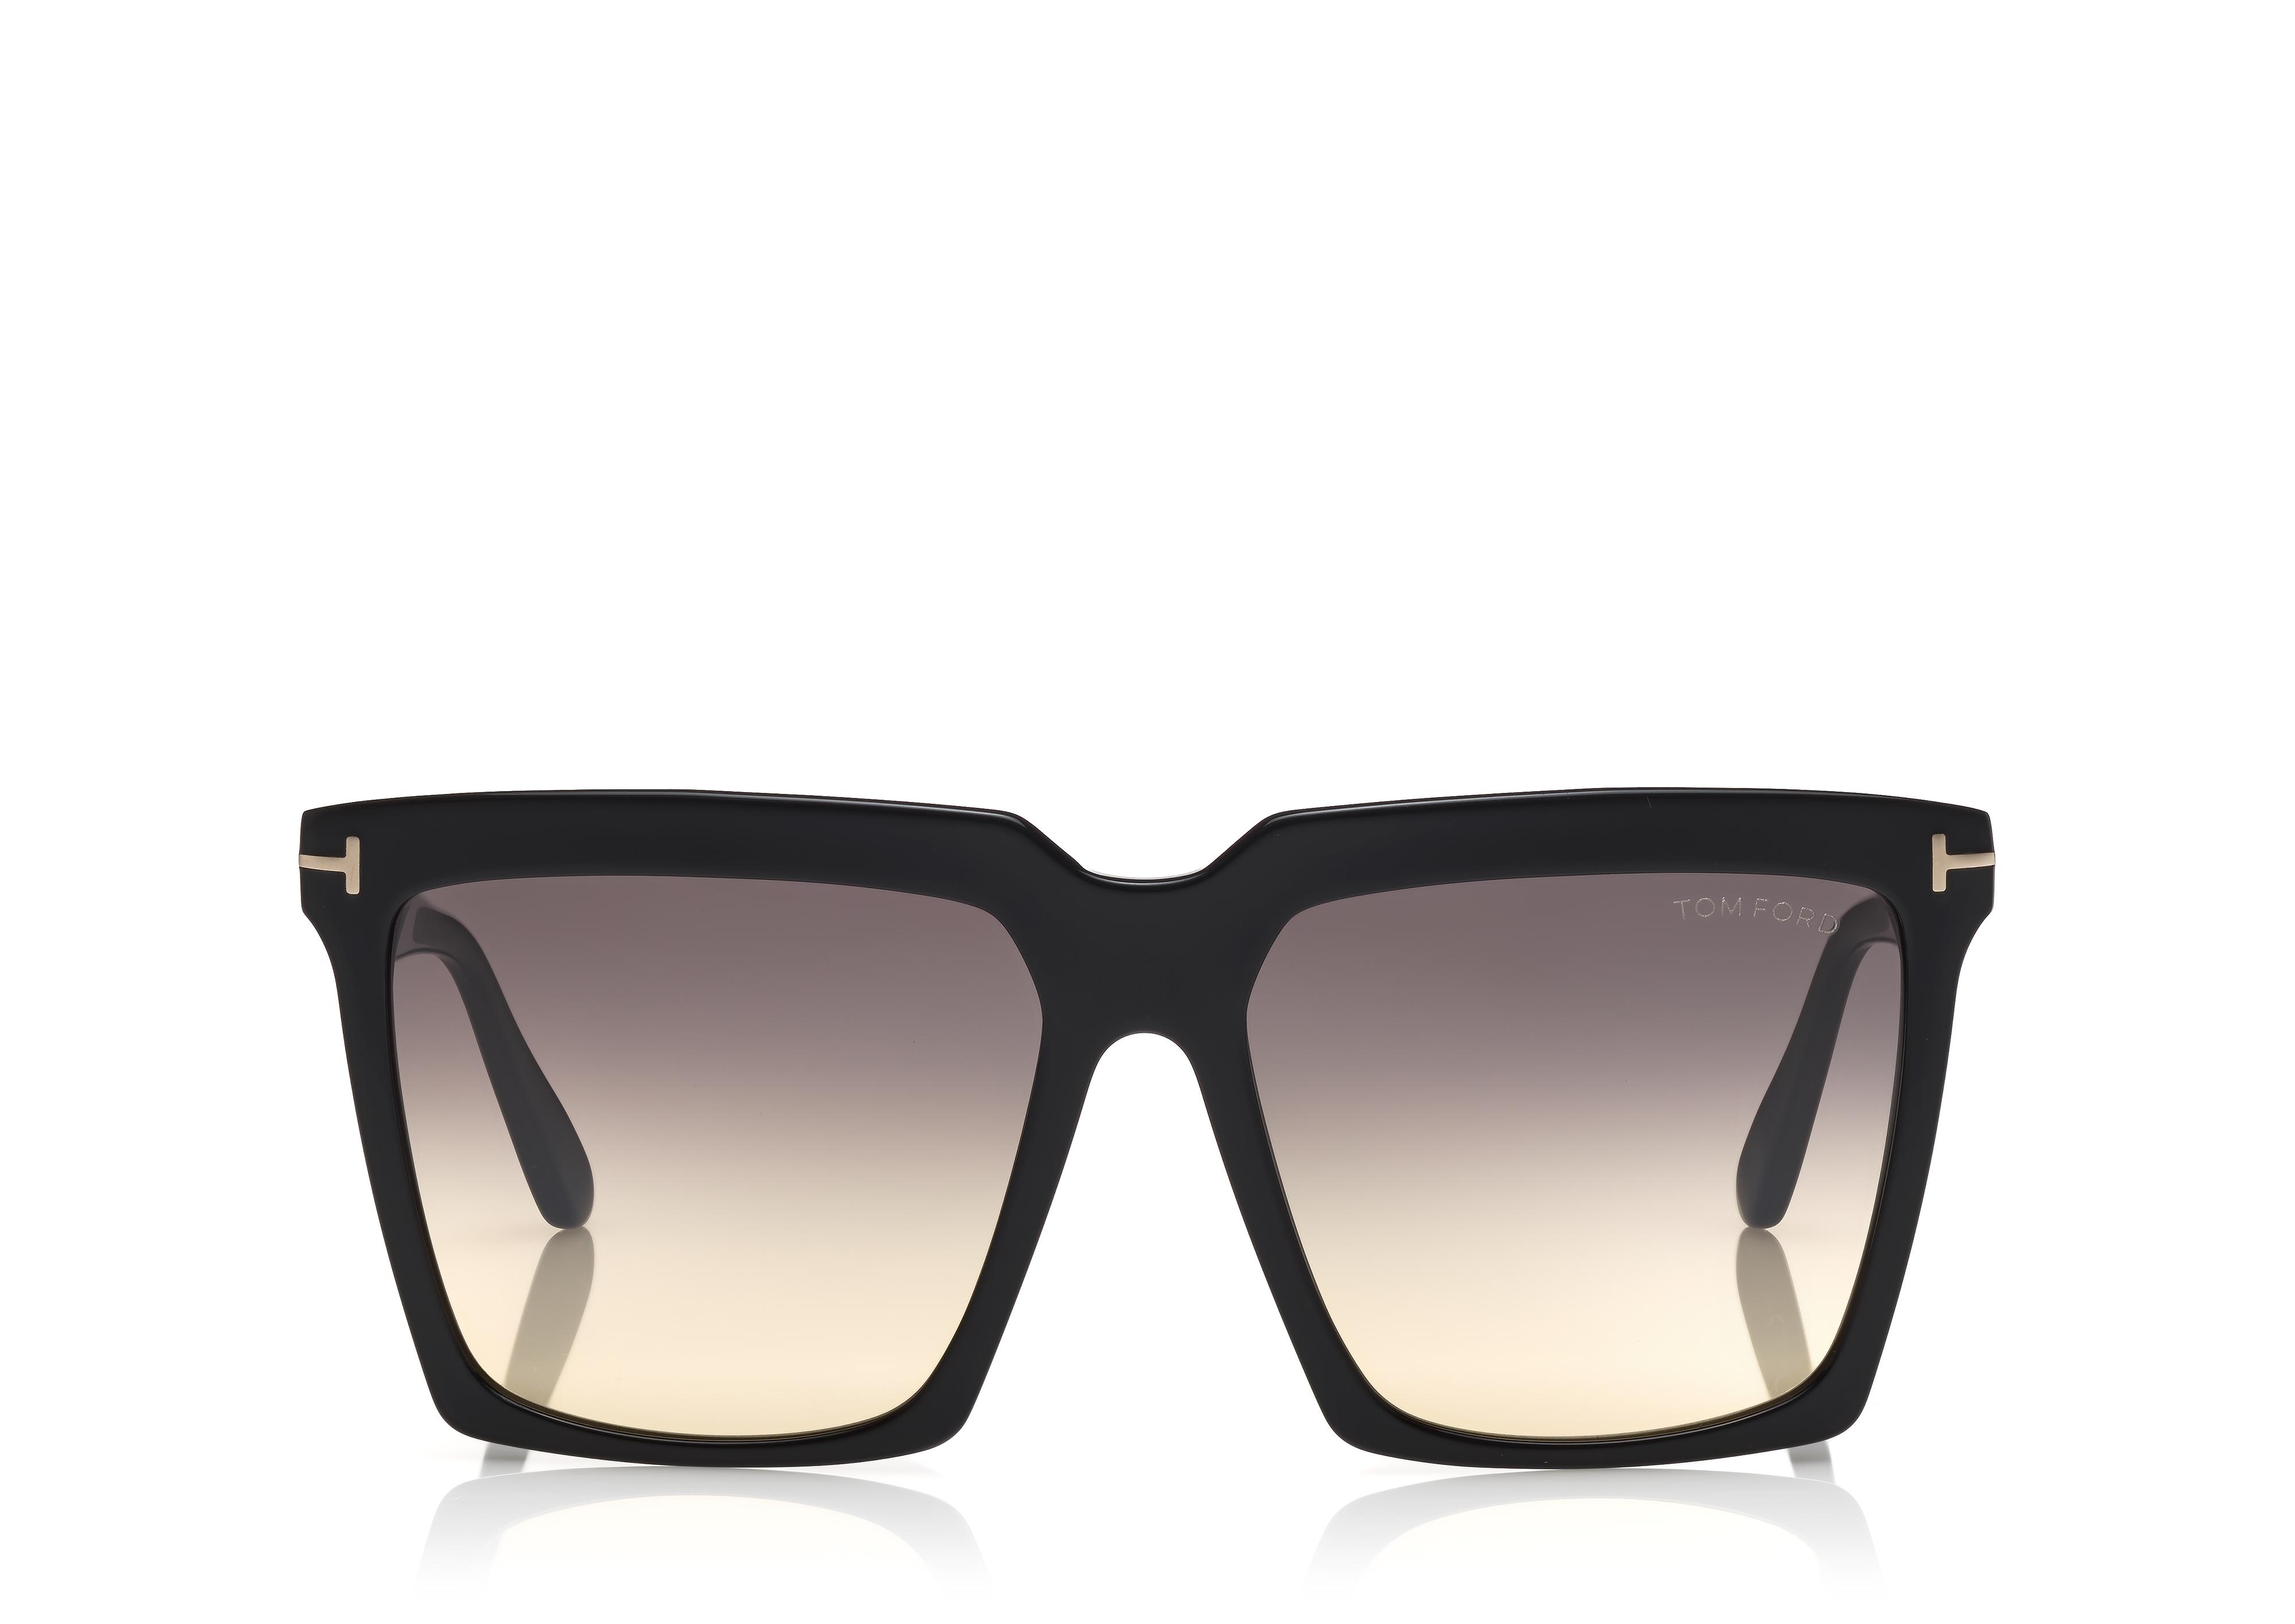 Tom Ford Sunglasses Cheaper Than Retail Price Buy Clothing Accessories And Lifestyle Products For Women Men